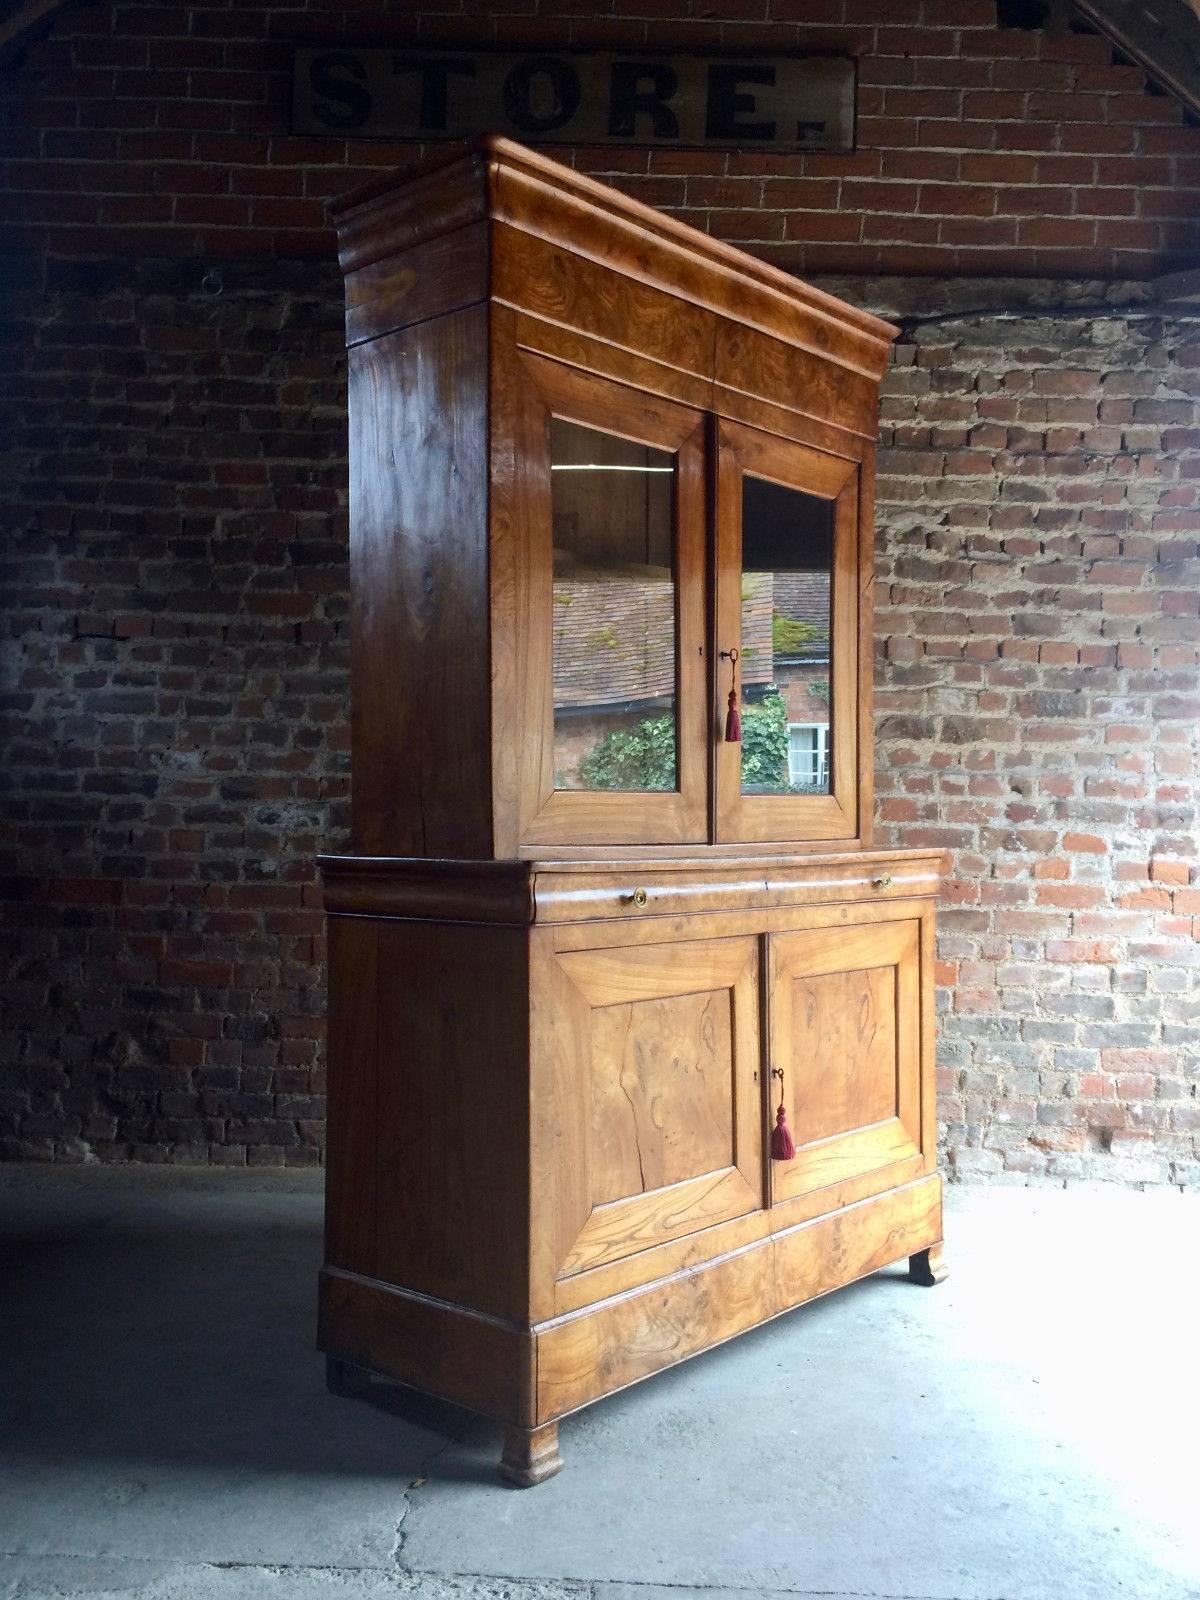 A magnificent Napoleon III 19th century French elm and burr-elm tall cabinet, circa 1850, the upper part with molded cornice and enclosed pair of glazed doors, the base fitted full-widh shallow drawer with brass knob handles, above a pair of panel